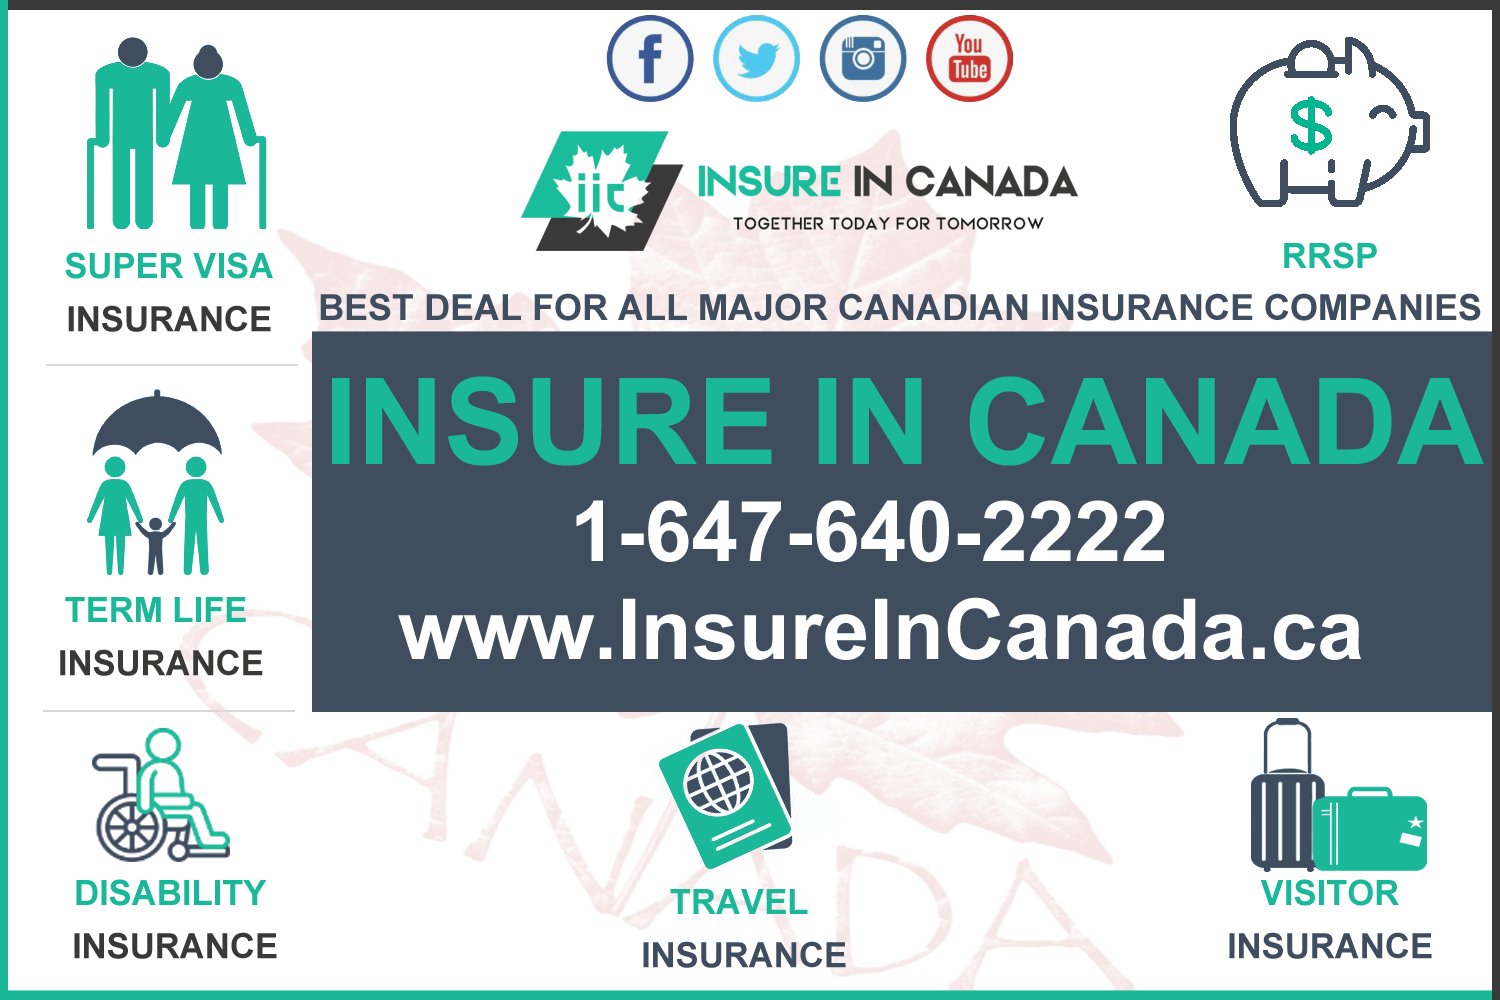 Insure In Canada | 218 Export Blvd, Suite 203 Mississauga, ON, L5S 0A7 Canada | Phone: (647) 640-2222